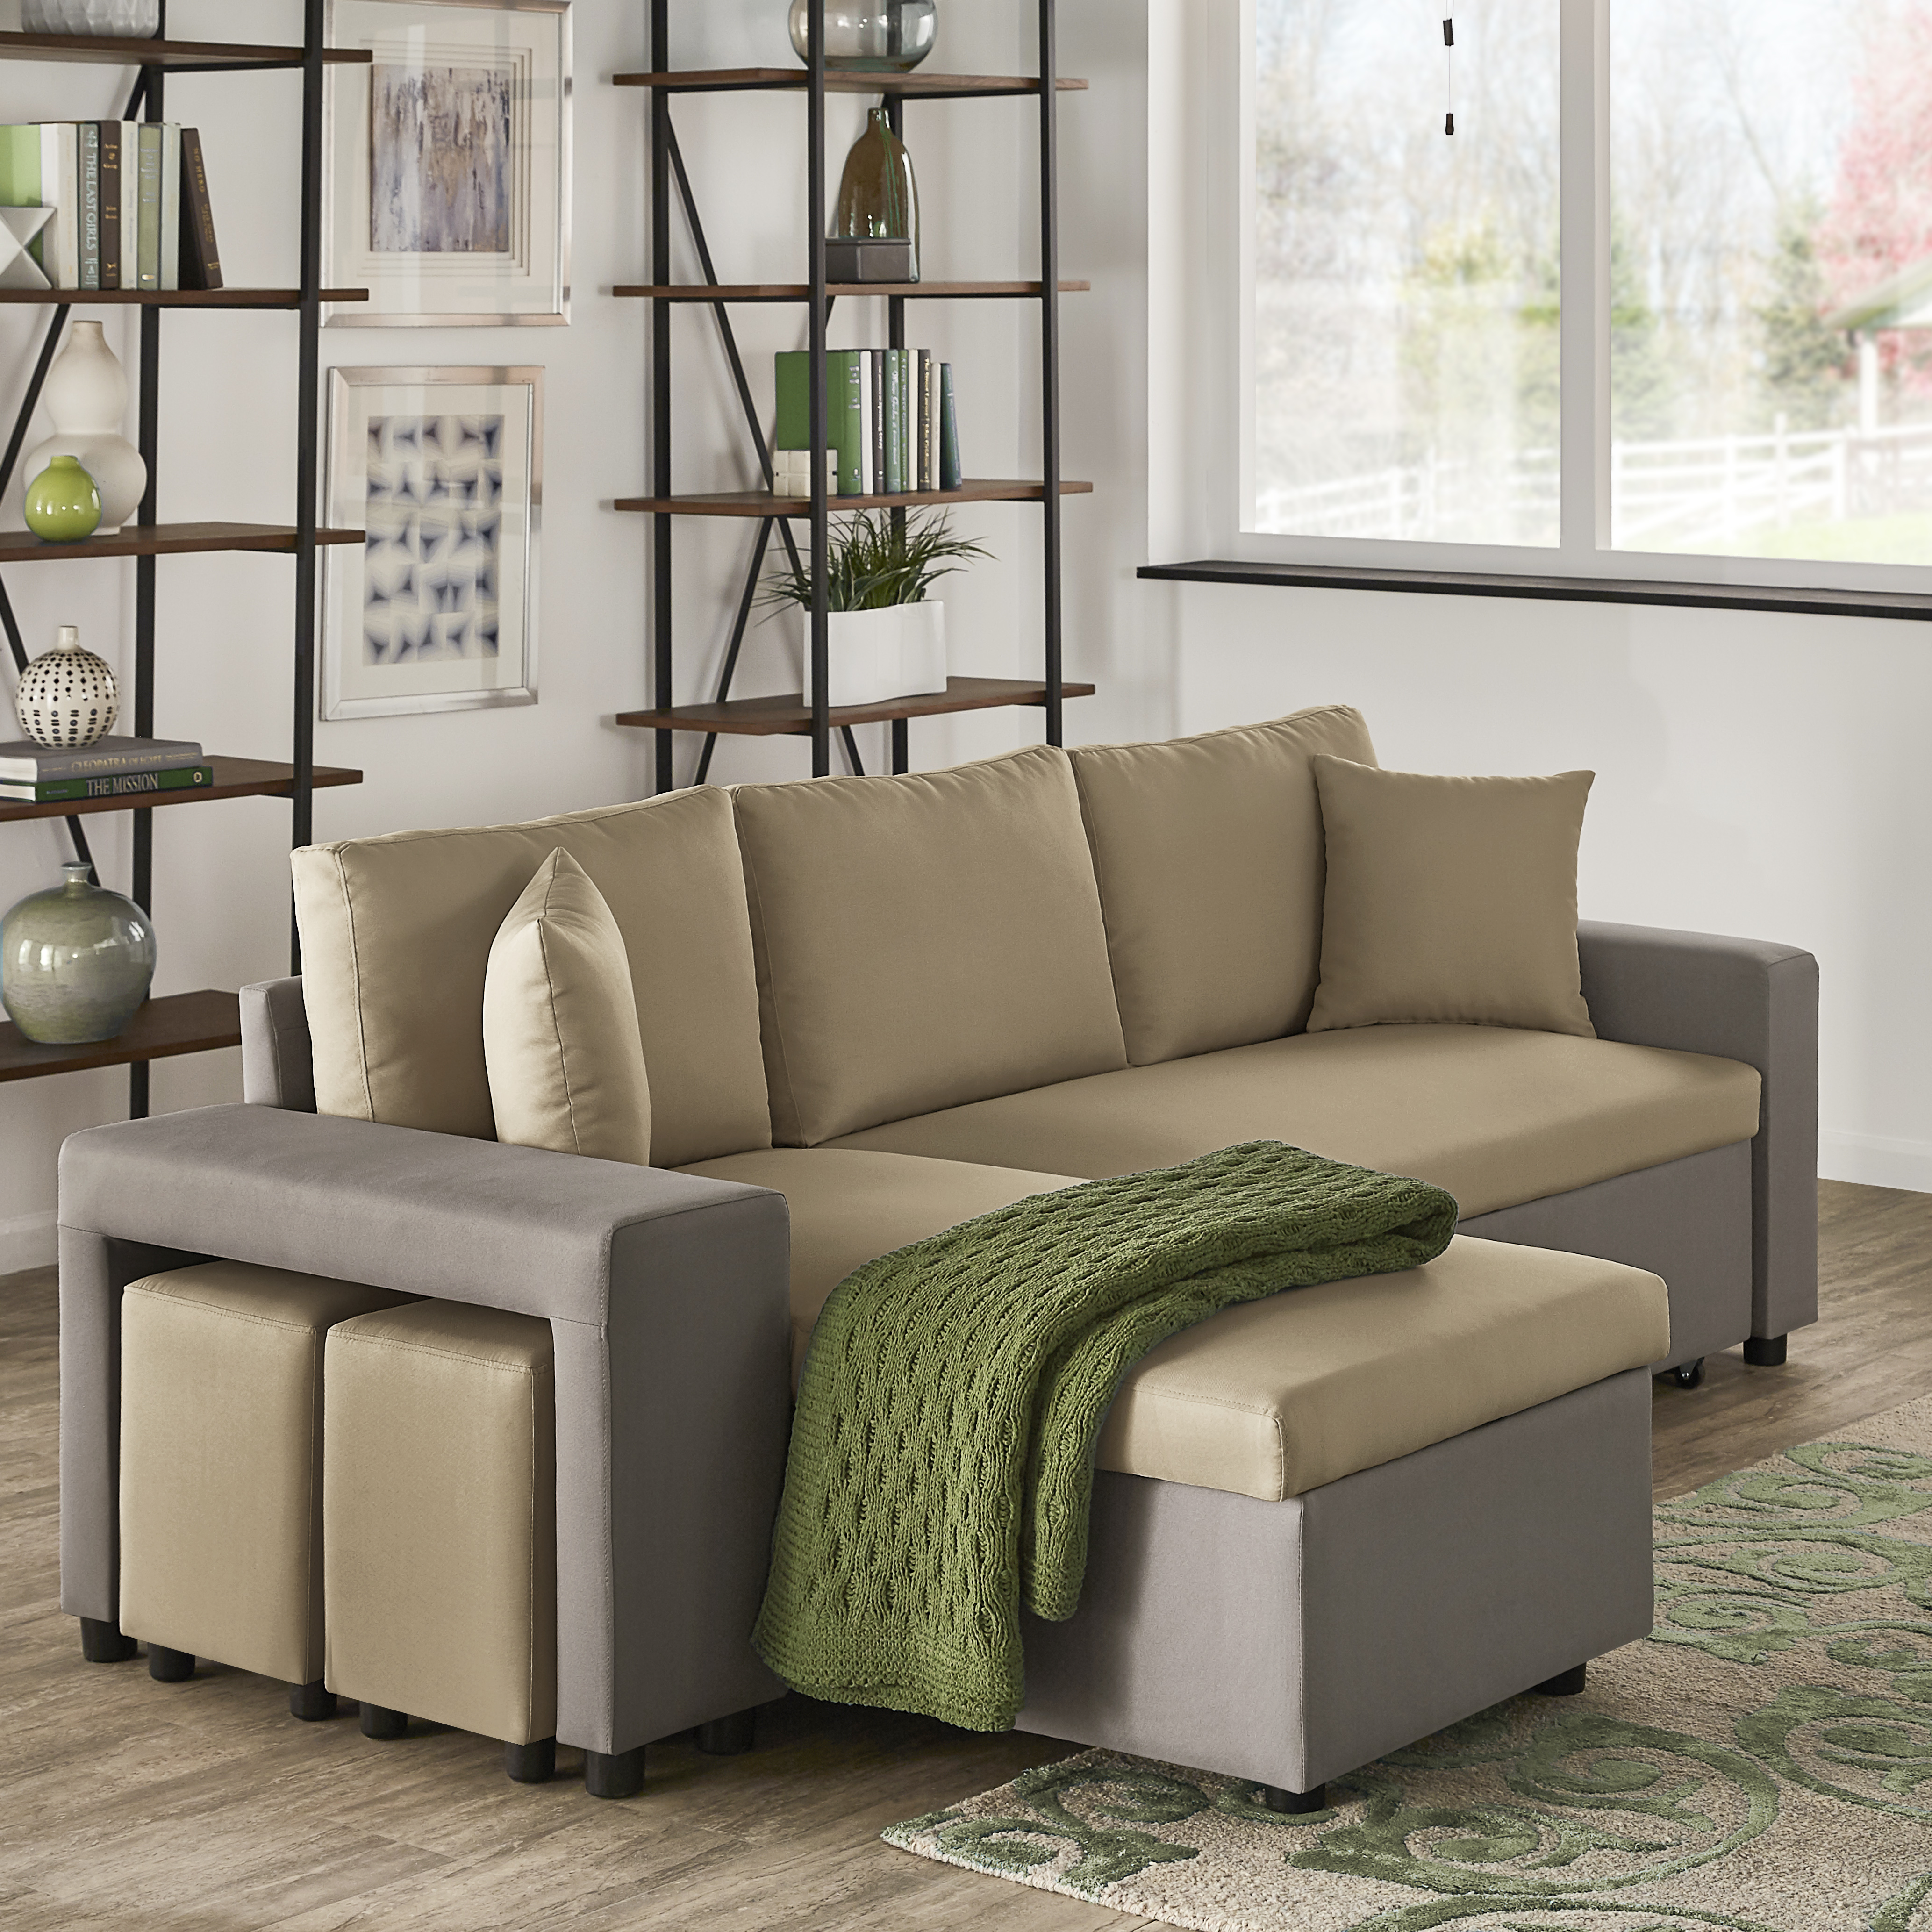 Multifunctional Two-Tone Fabric Convertible Chaise Sofa with Two Ottomans, Two Pillows, and Storage